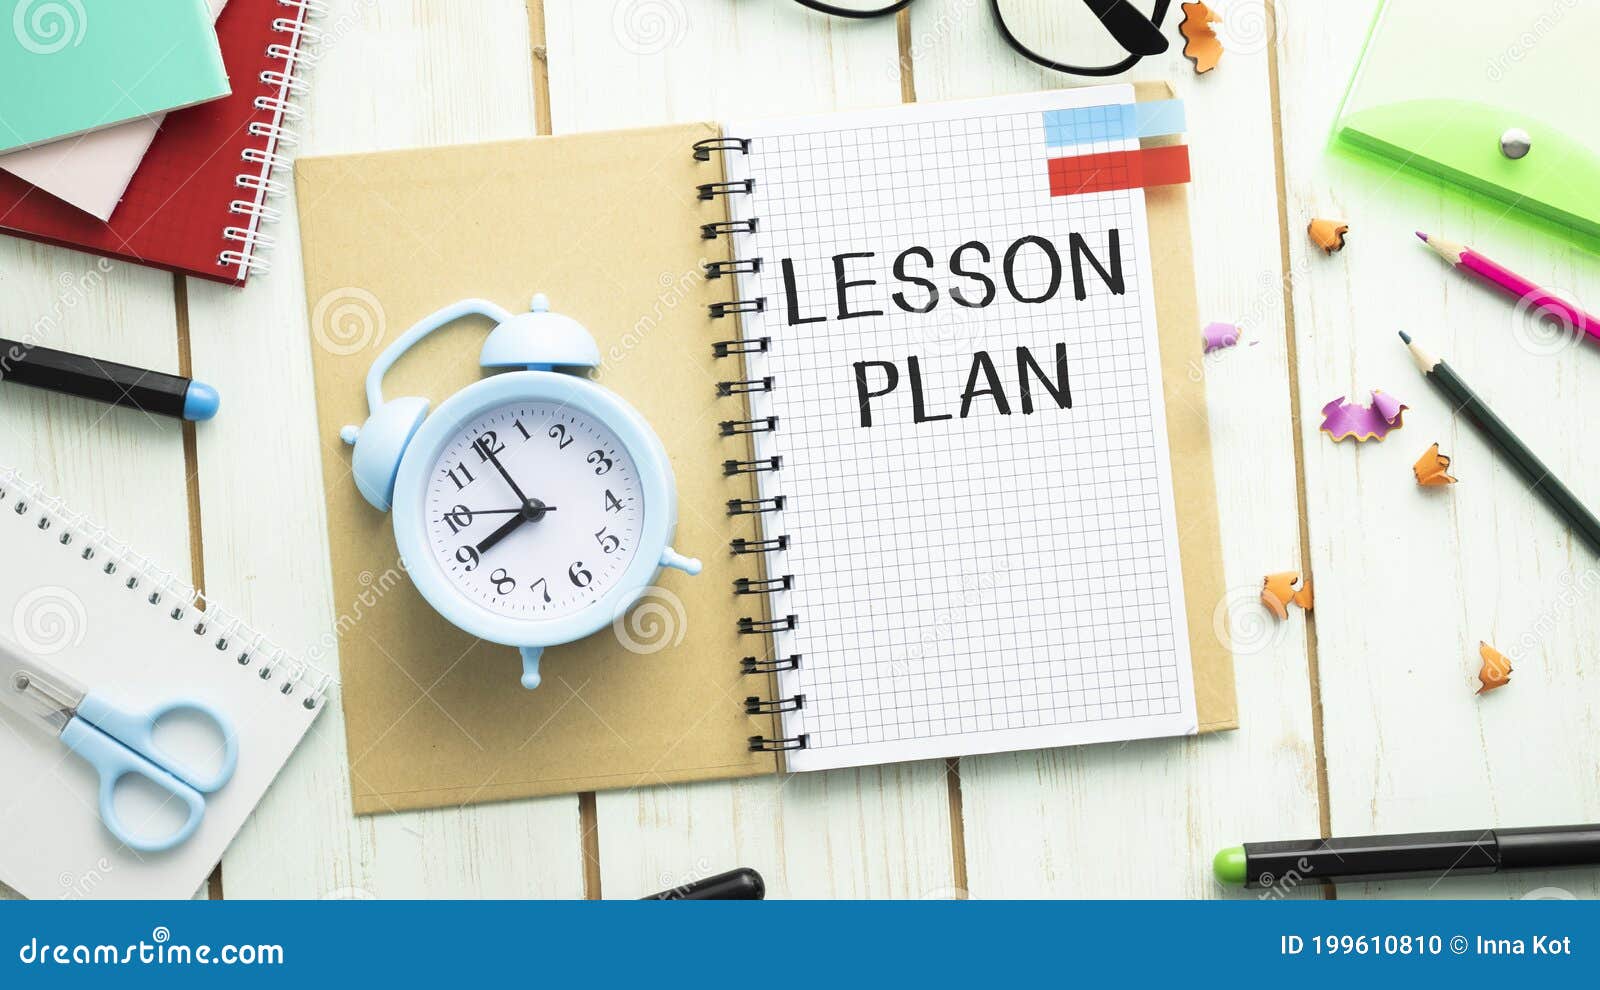 lesson planning text written on a notebook